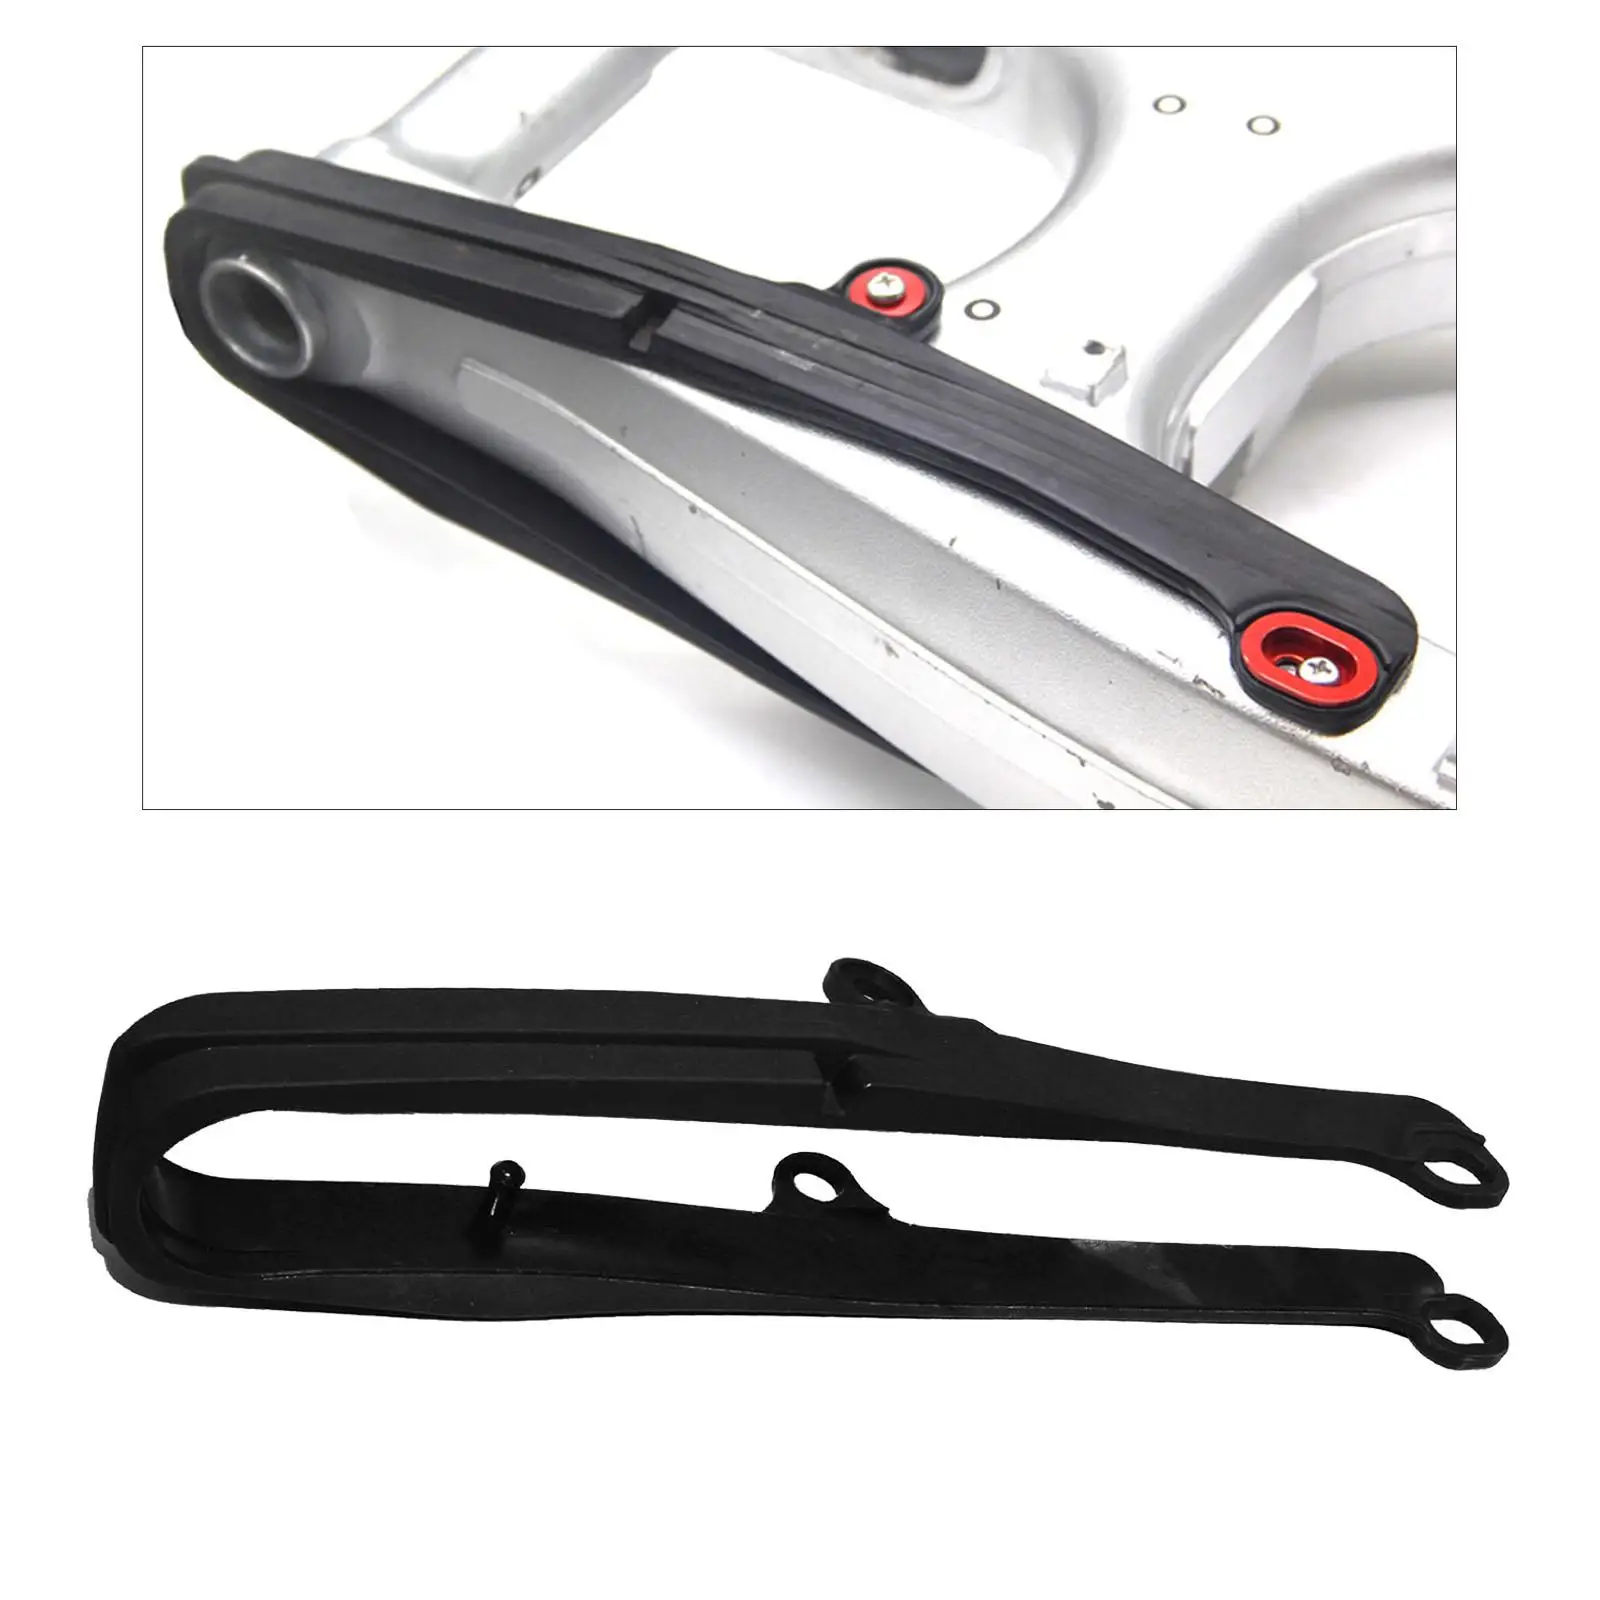 New Honda Swing Arm Rear Chain Guide Slider Chain Guide Guard for Off-road Parts HONDA CRF250L 2013-2020 CRF250RLA 2017-2020